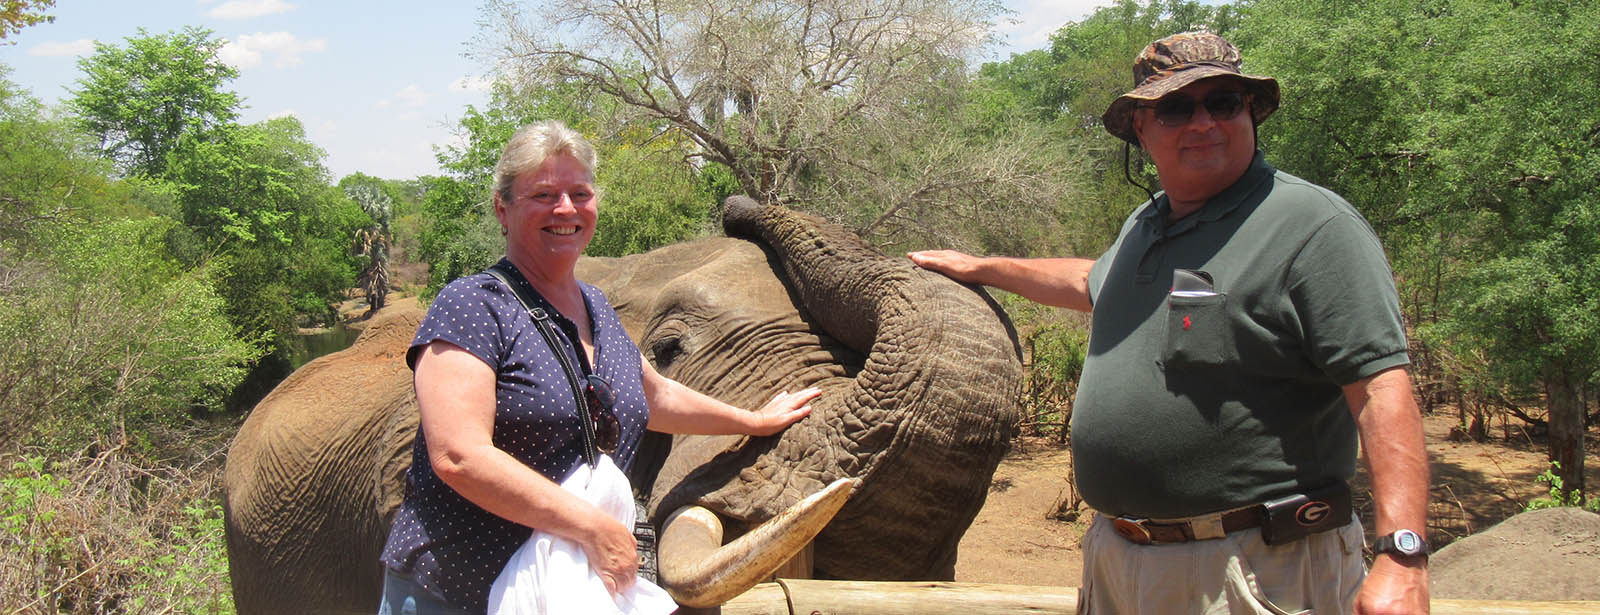 Man and woman standing and smiling while petting an elephant